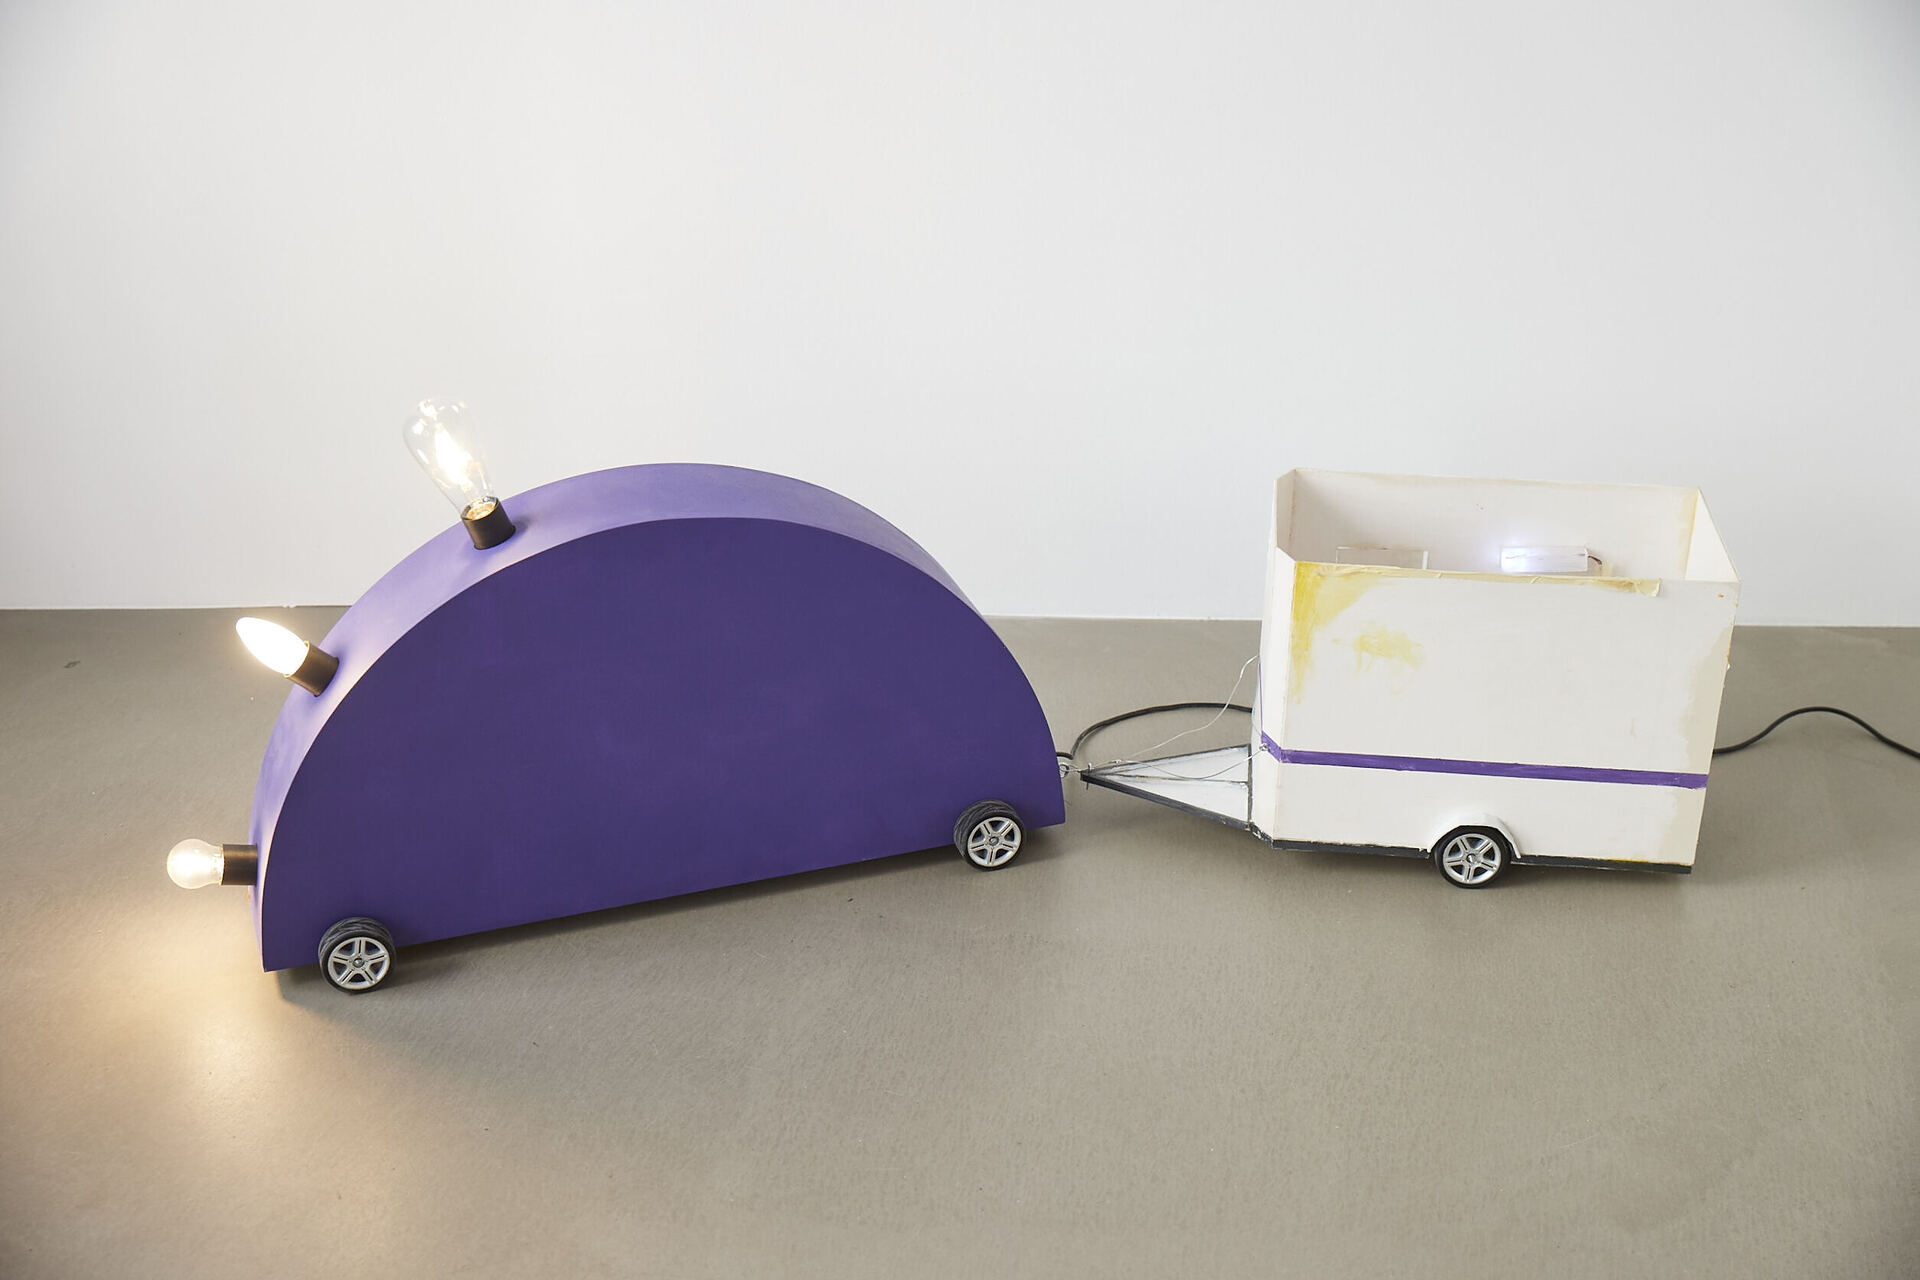 Frieder Haller, Memphis Blues (after Martine Bedin) II, 2021 Wood, wire, board, electrical wiring, two light bulbs and model car wheels 53 × 146,3 × 23 cm / 20.8 × 57.5 × 9 inches